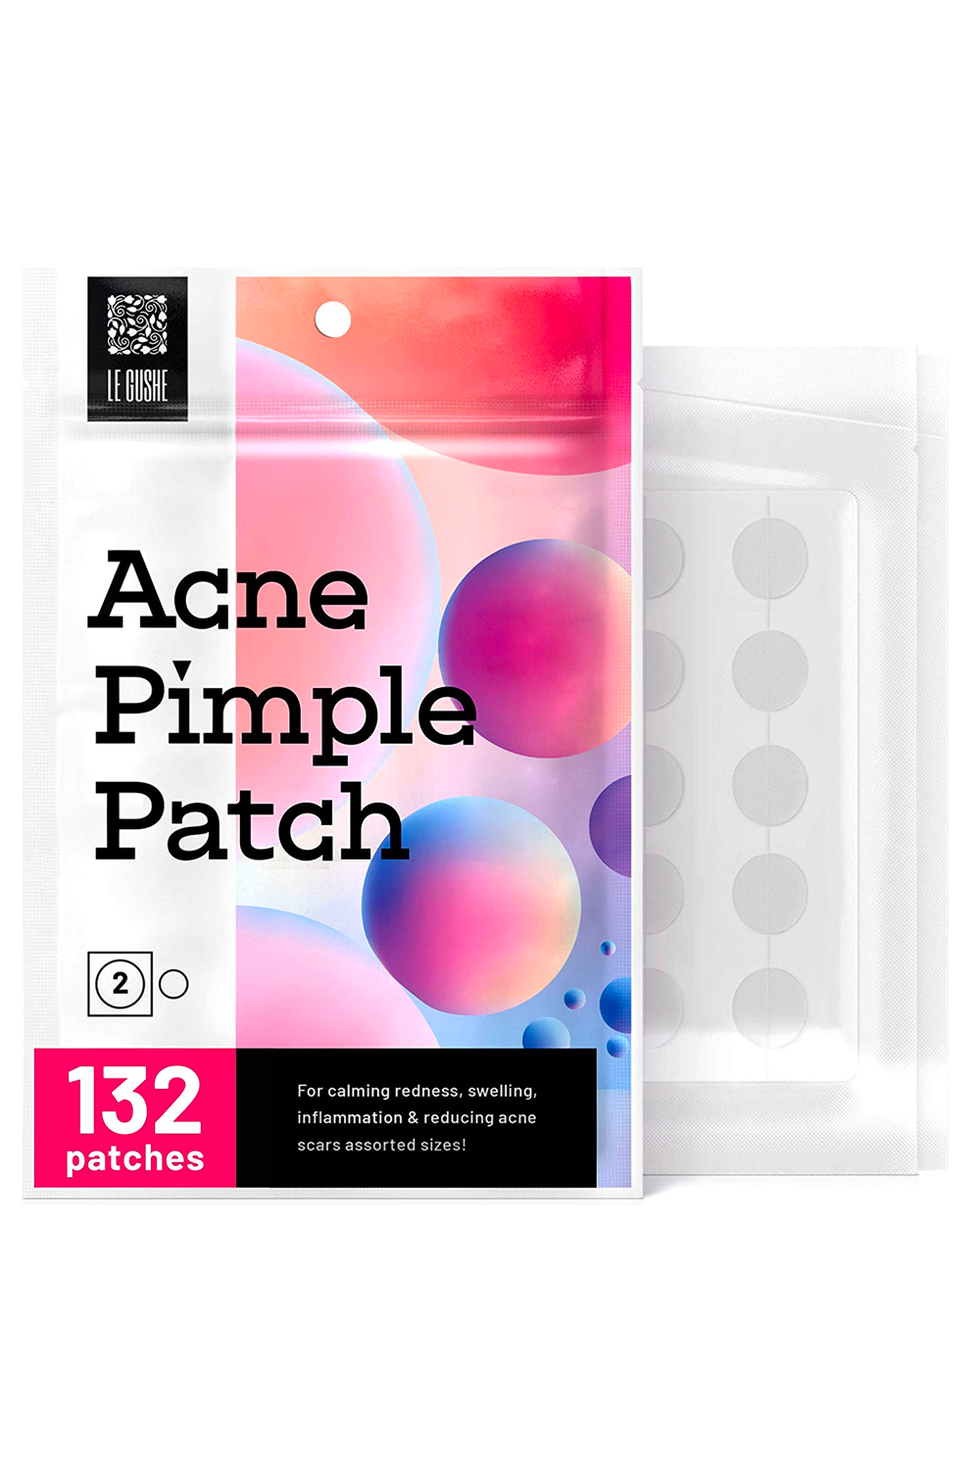 Le Gushe Acne Pimple Patch